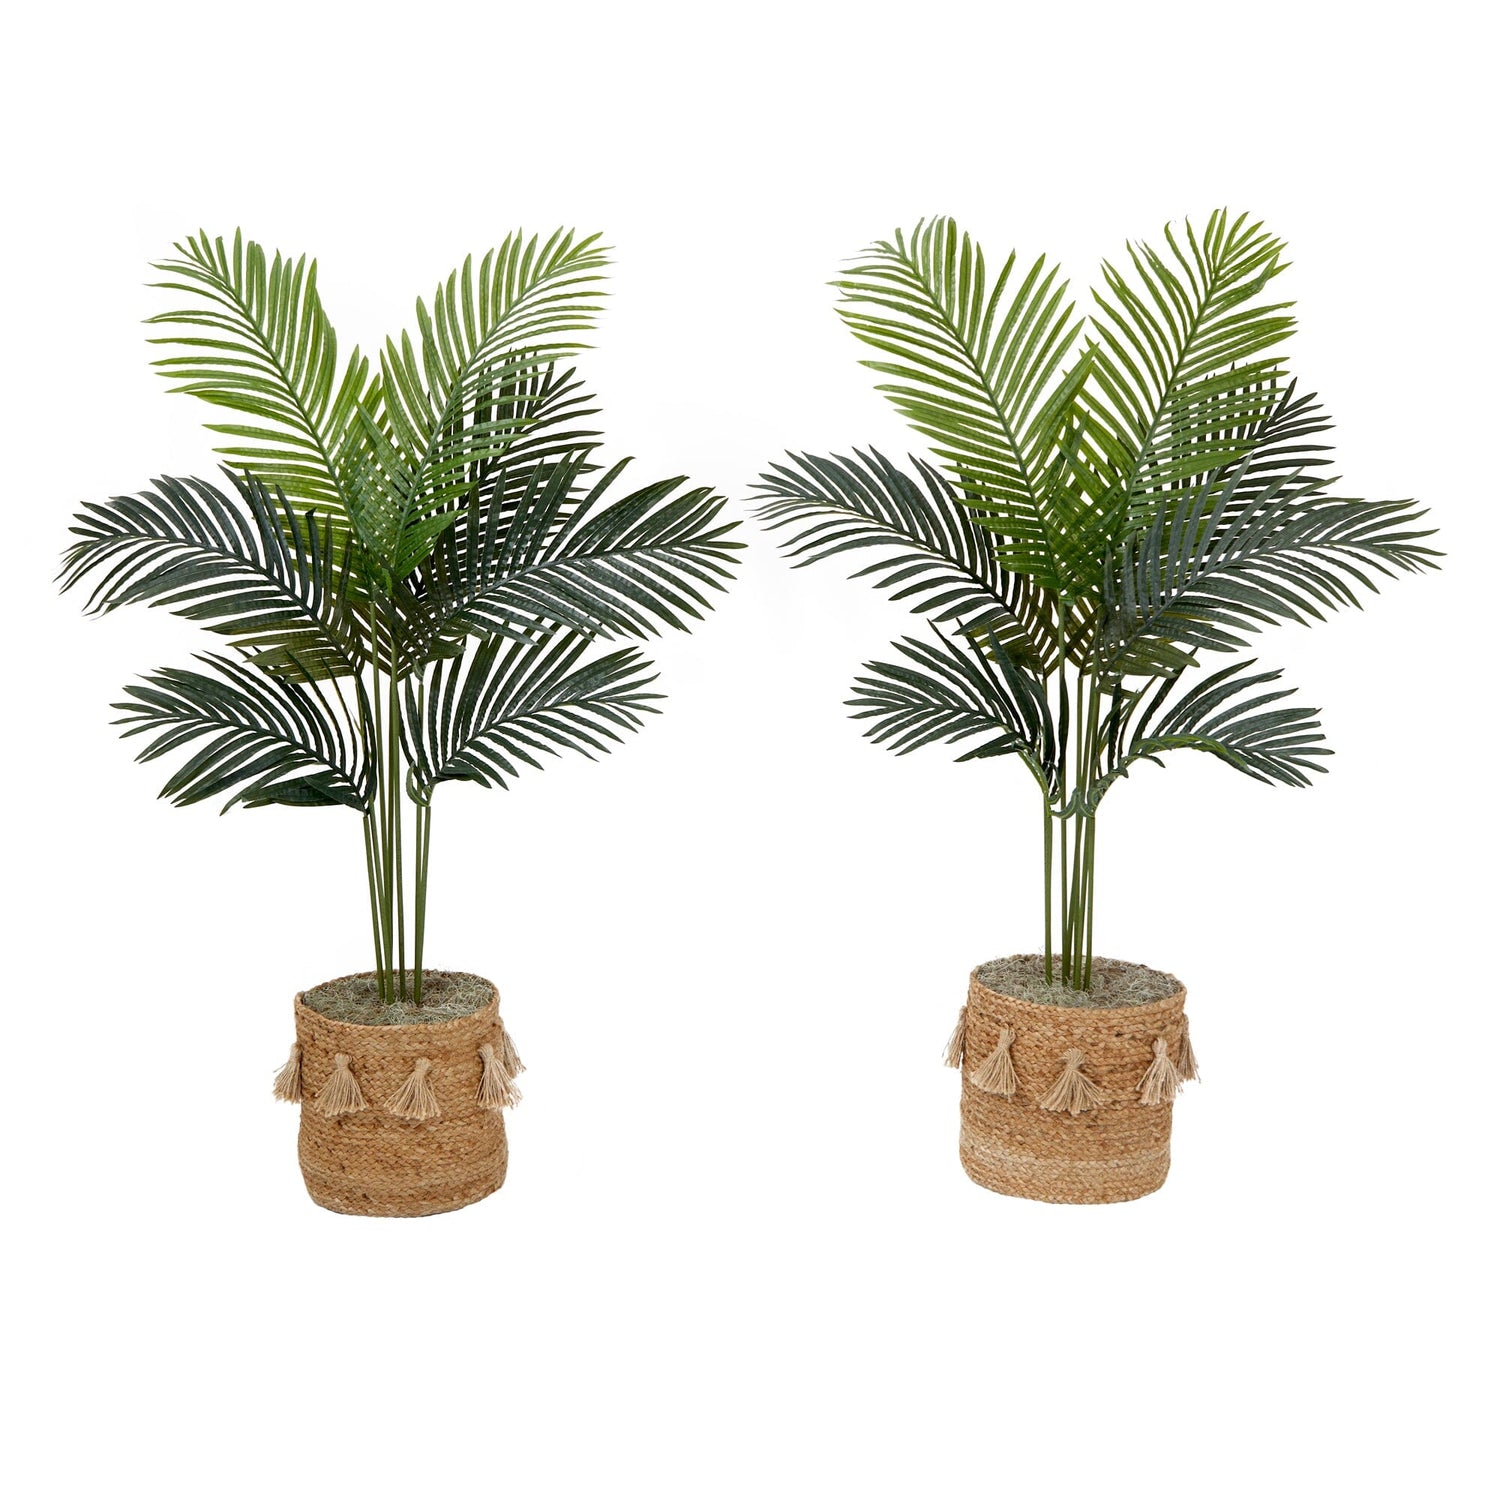 4' Artificial Paradise Palm Tree with Handmade Jute & Cotton Basket with Tassels DIY KIT - Set of 2